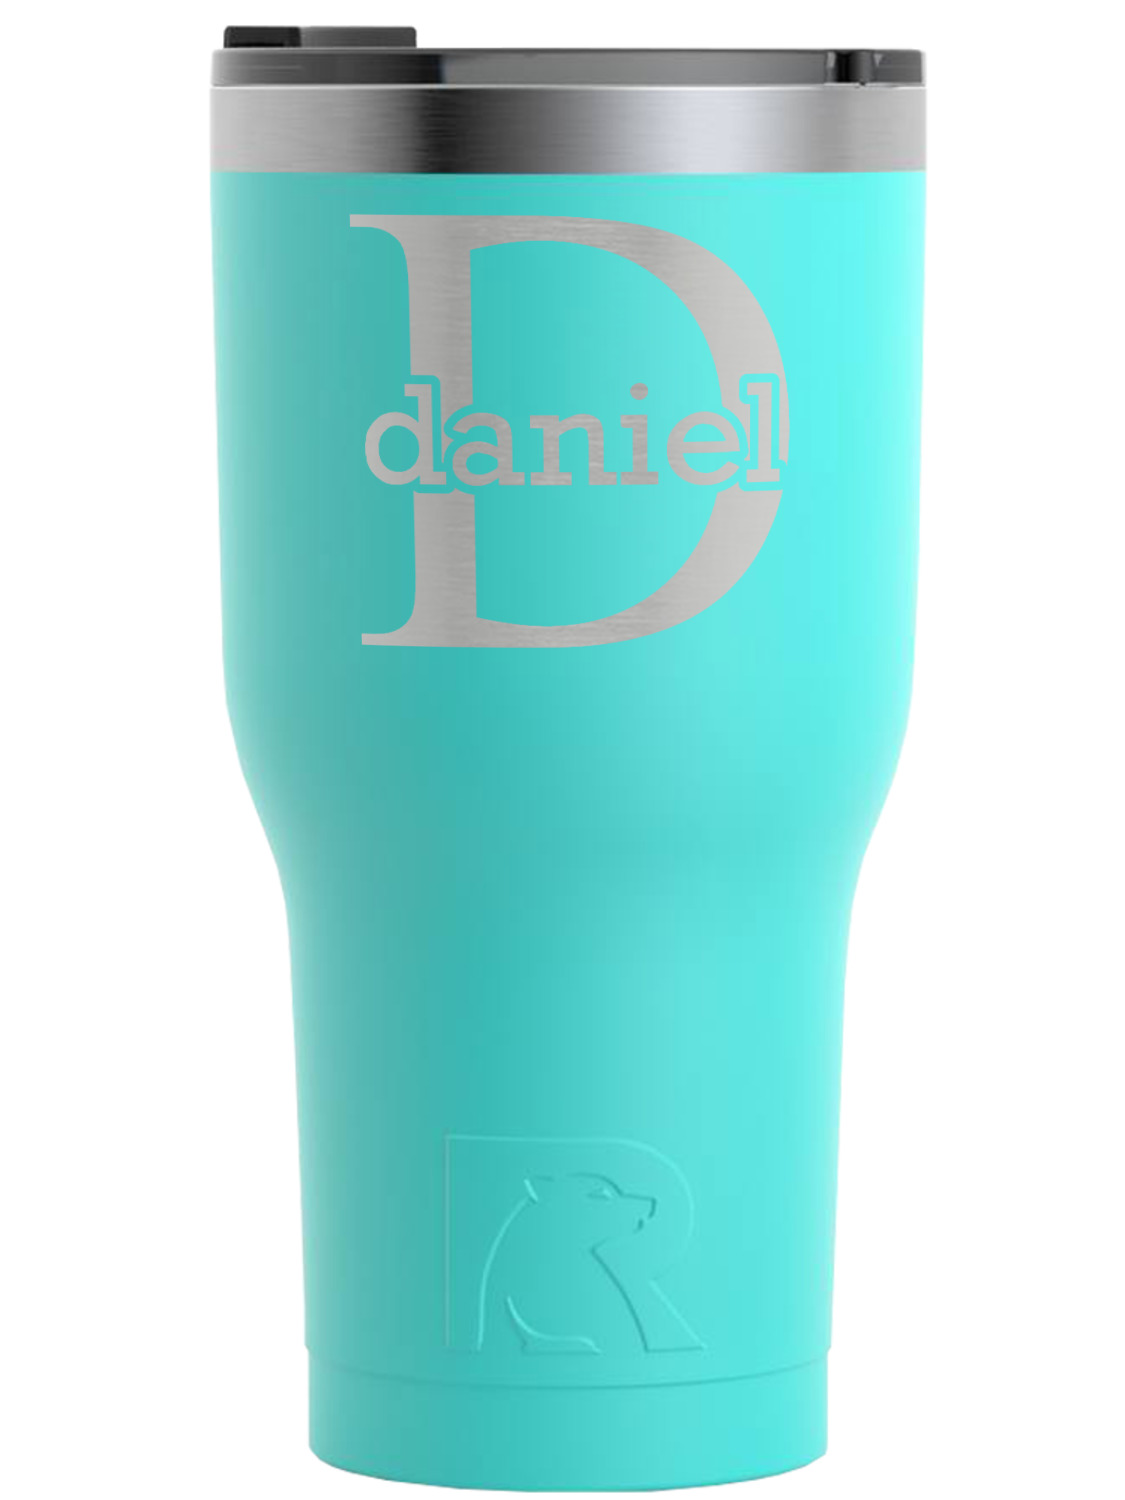 https://www.youcustomizeit.com/common/MAKE/837778/Name-Initial-for-Guys-Teal-RTIC-Tumbler-Front-2.jpg?lm=1665683652